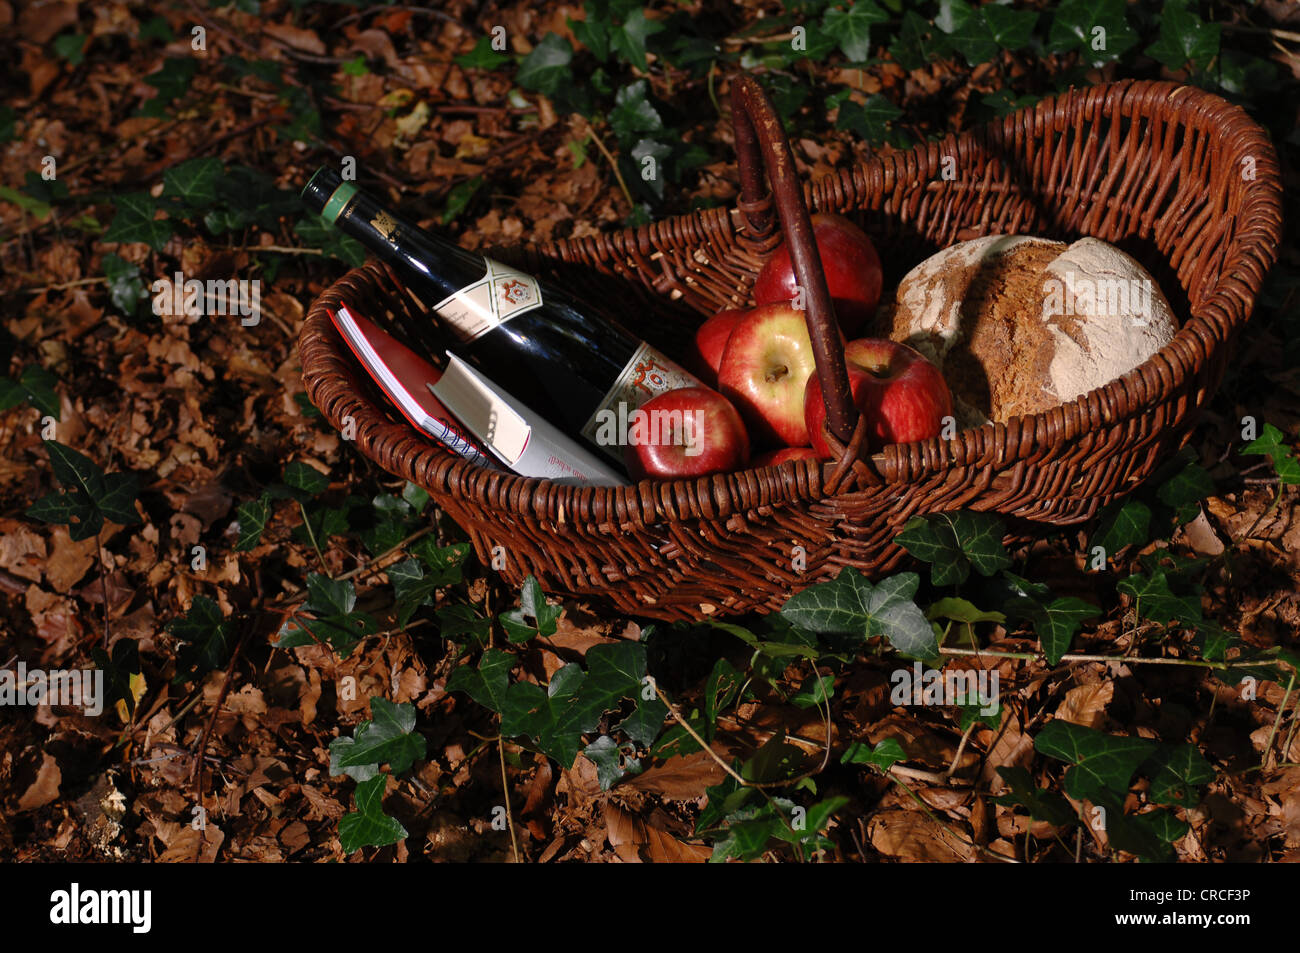 Little Red Riding Hood-style basket in the forest filled with wine, apples  and bread Stock Photo - Alamy